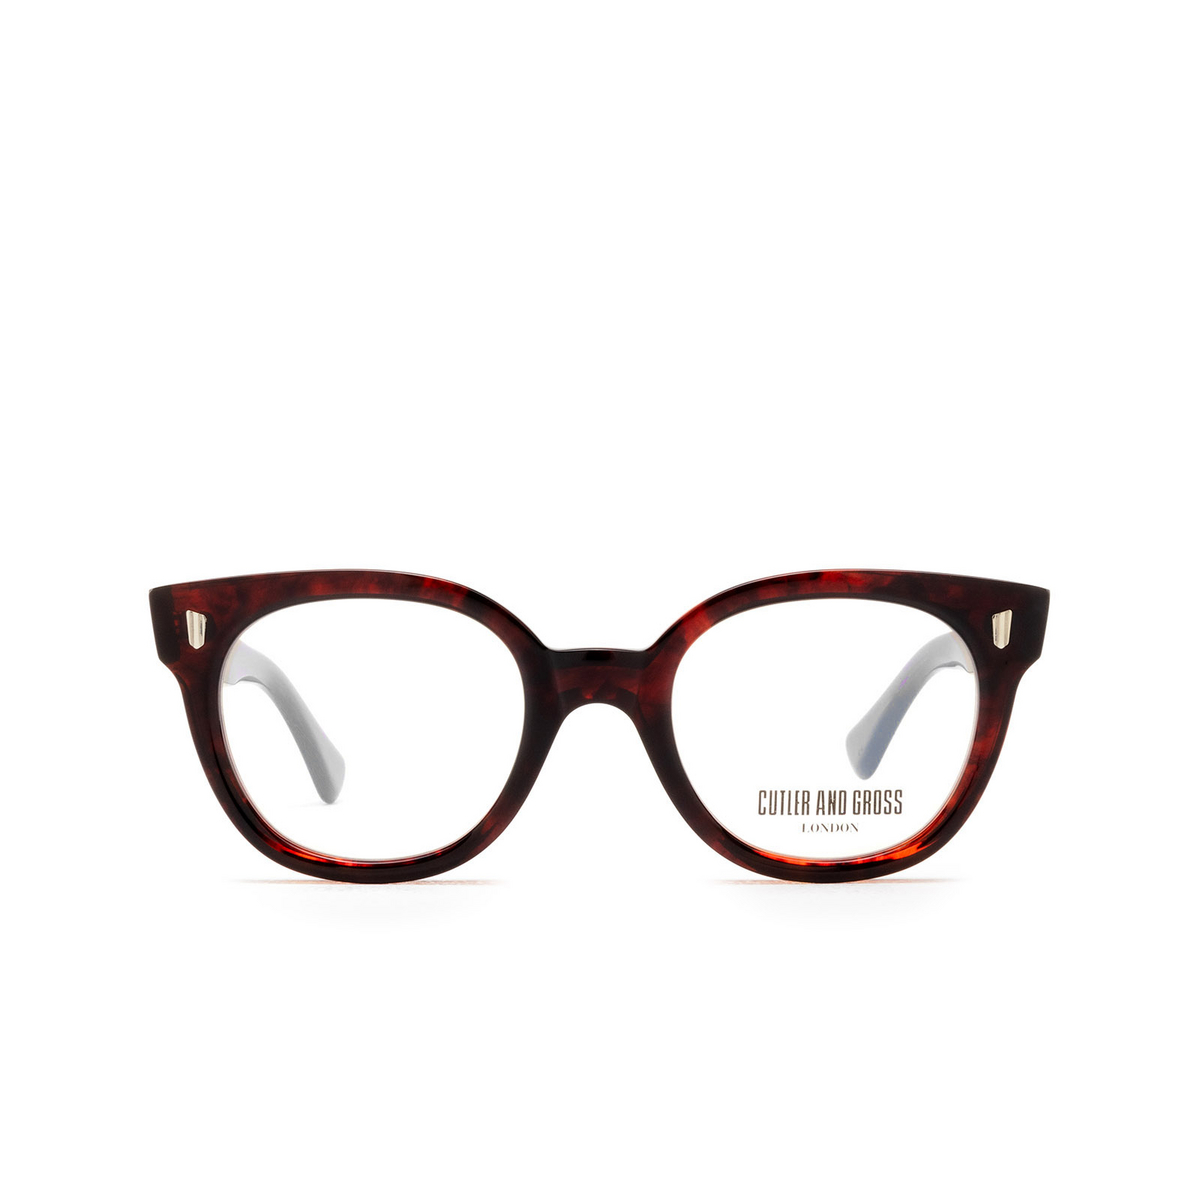 Cutler and Gross 9298 Eyeglasses 02 Red Havana - front view